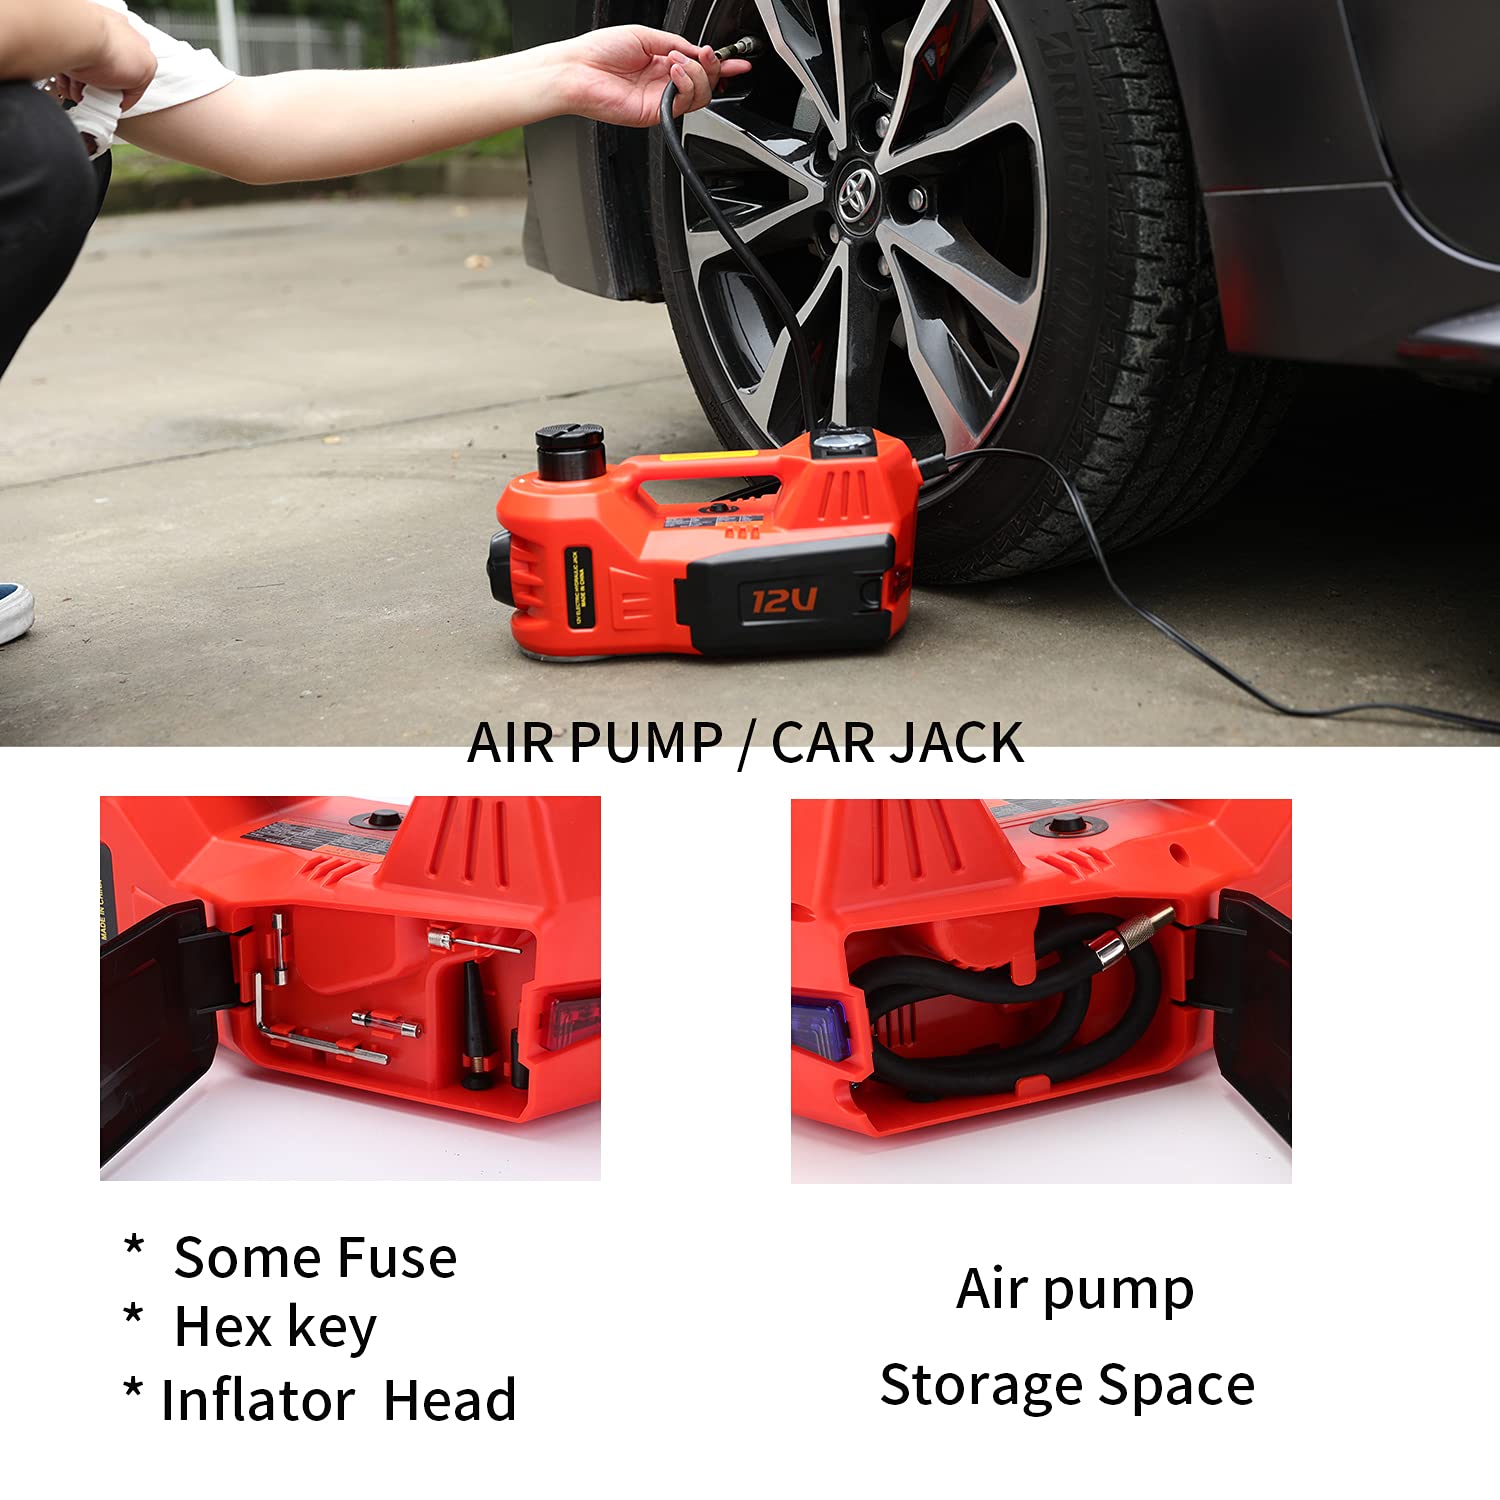 ROGTZ Electric Car Jack 5 Ton 12V Hydraulic Car Jack with Tire Inflator Pump and LED Light, Electric Car Jack Lift Floor Jack for SUV Sedans Tire Change (Red)